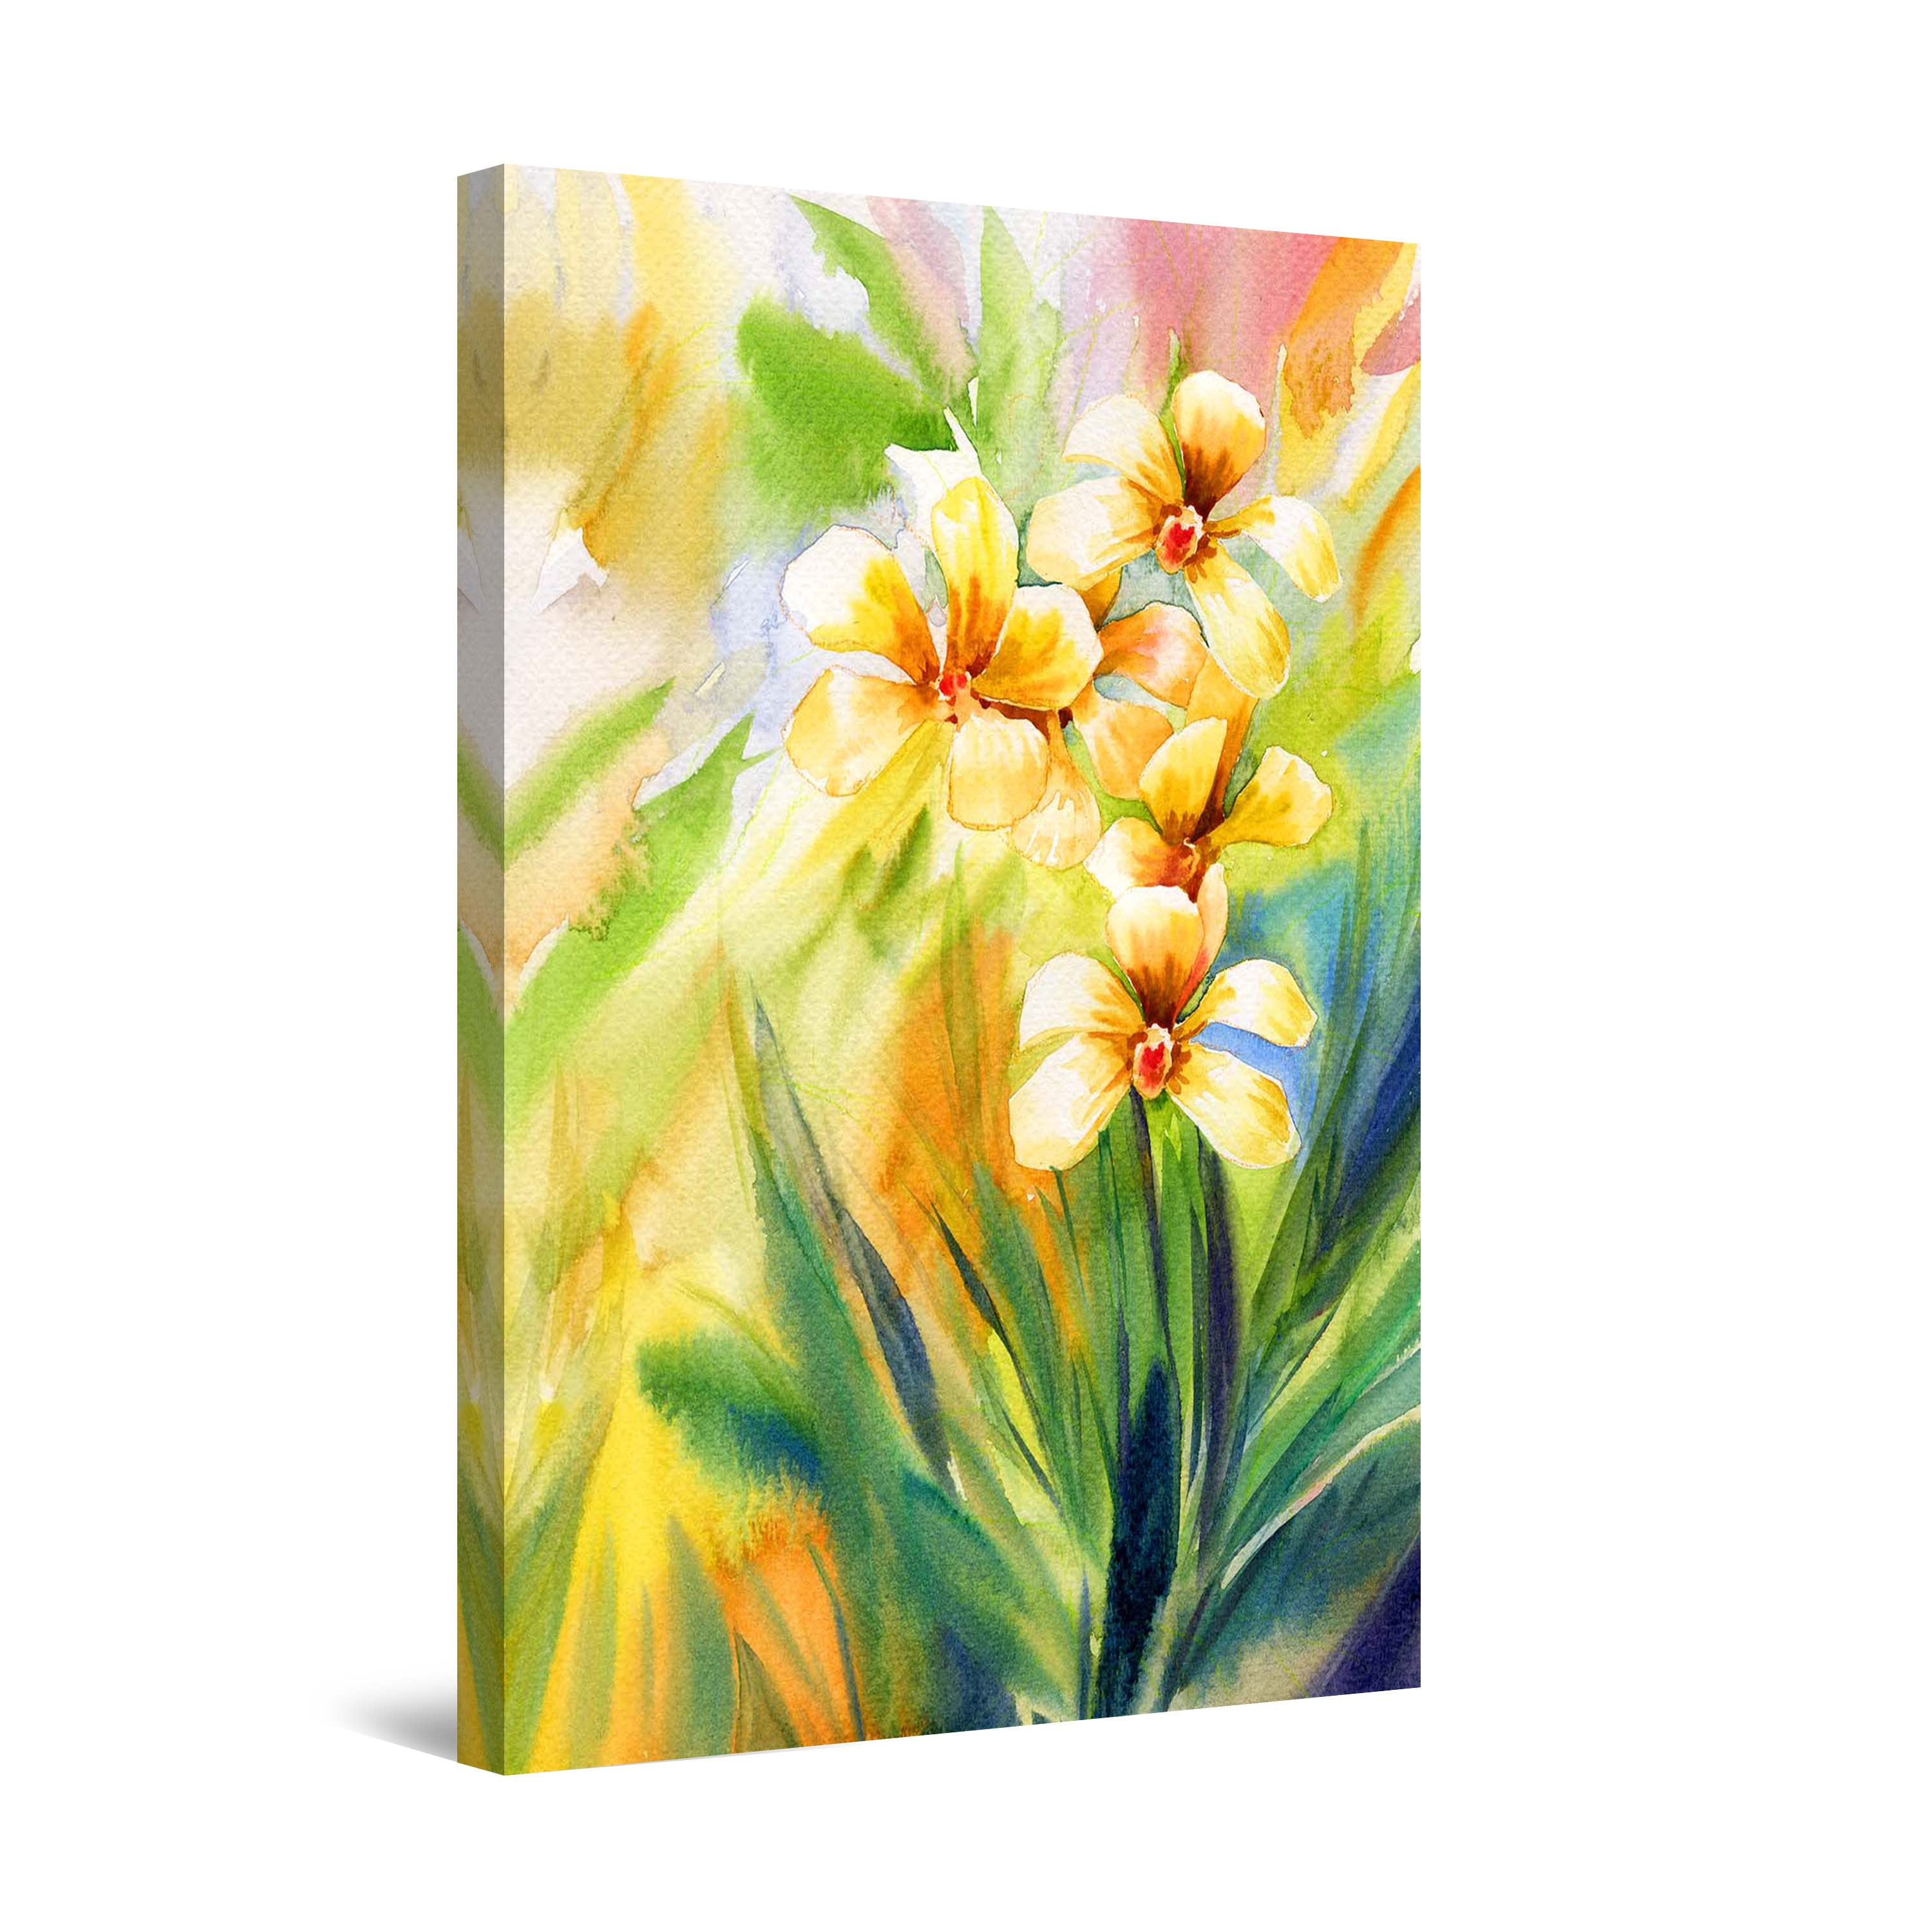 FLORAL FLOWER ART Picture Yellow Grey White Spring Blossom Canvas Wall Large 